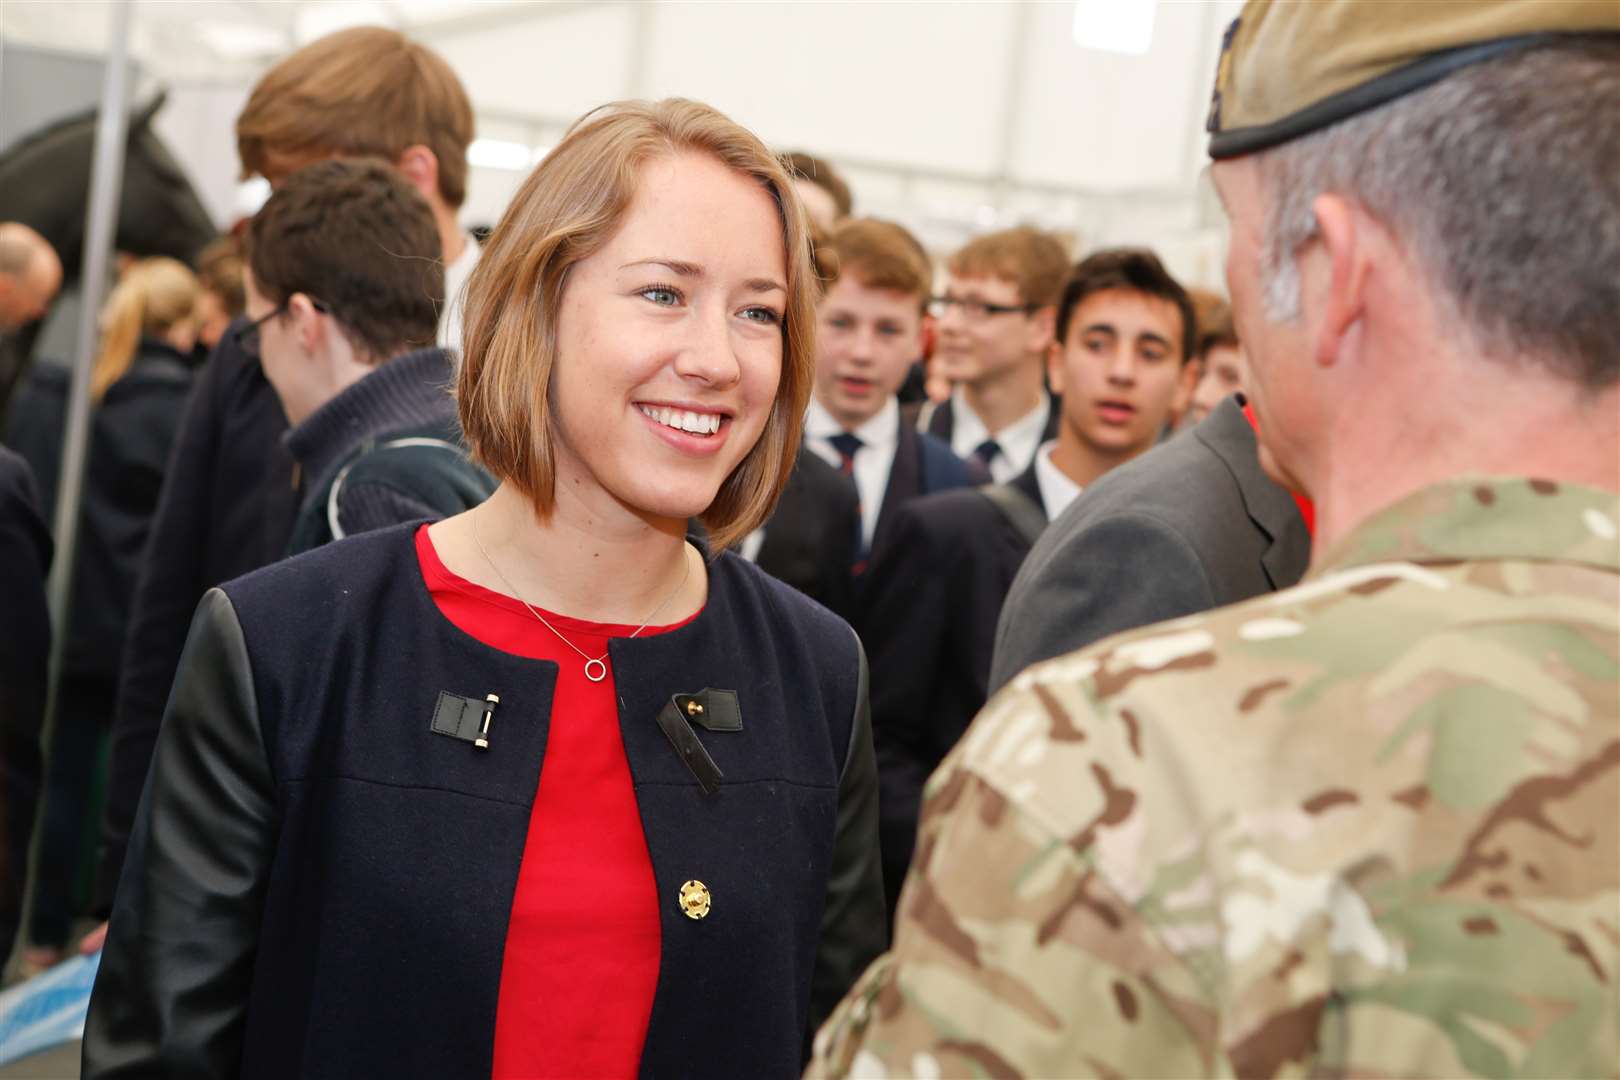 Winter Olympic champion Lizzy Yarnold was the star guest at last year's KentChoices4u